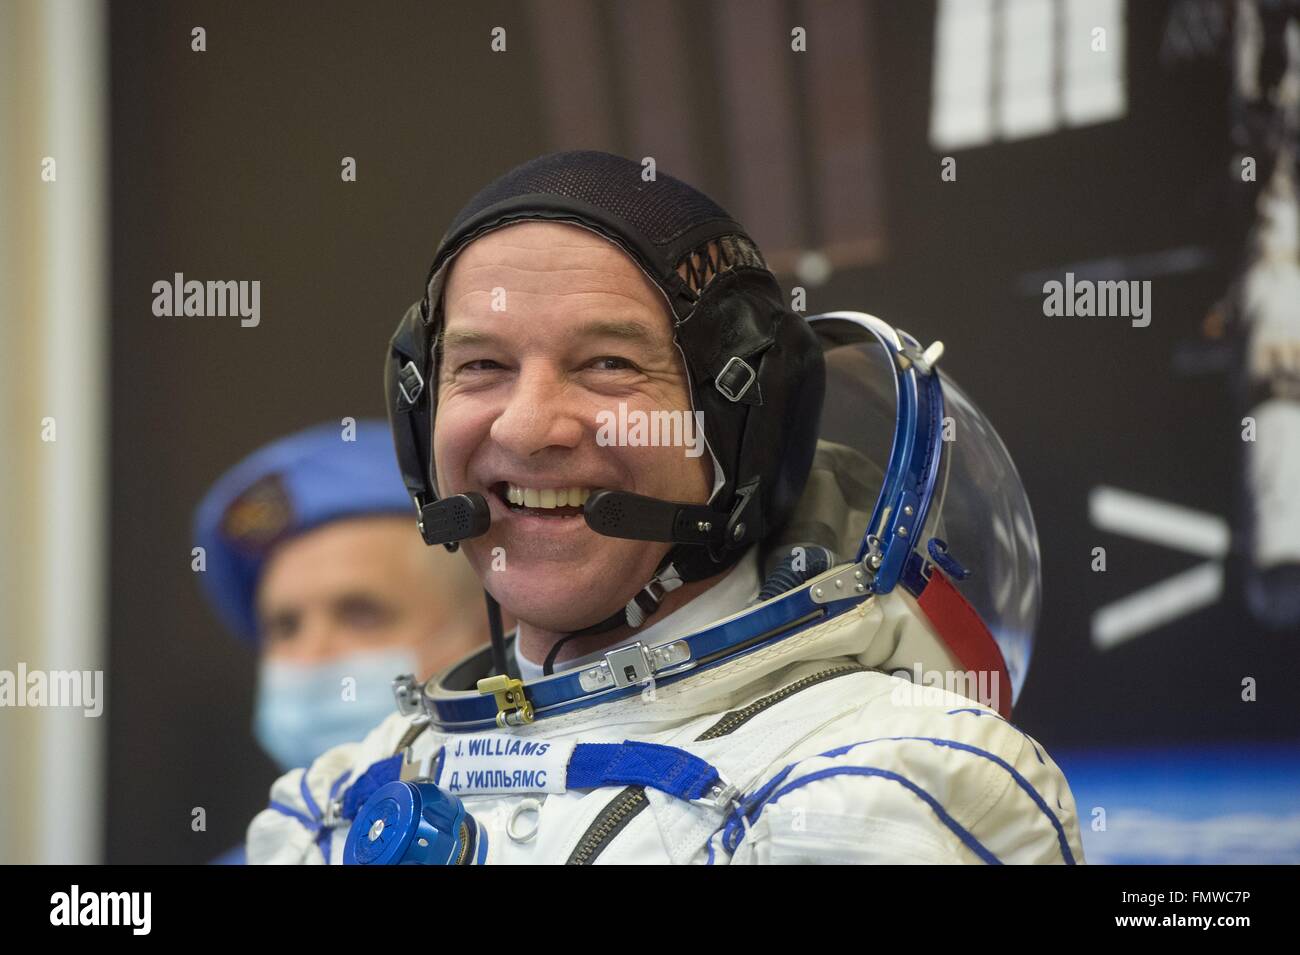 International Space Station Expedition 47 astronaut Jeff Williams of NASA during the leak check of his Sokol launch suit at the Baikonur Cosmodrome March 4, 2016 in Kazakhstan. The crew are scheduled to launch on a six-month mission to the station on March 19th. Stock Photo